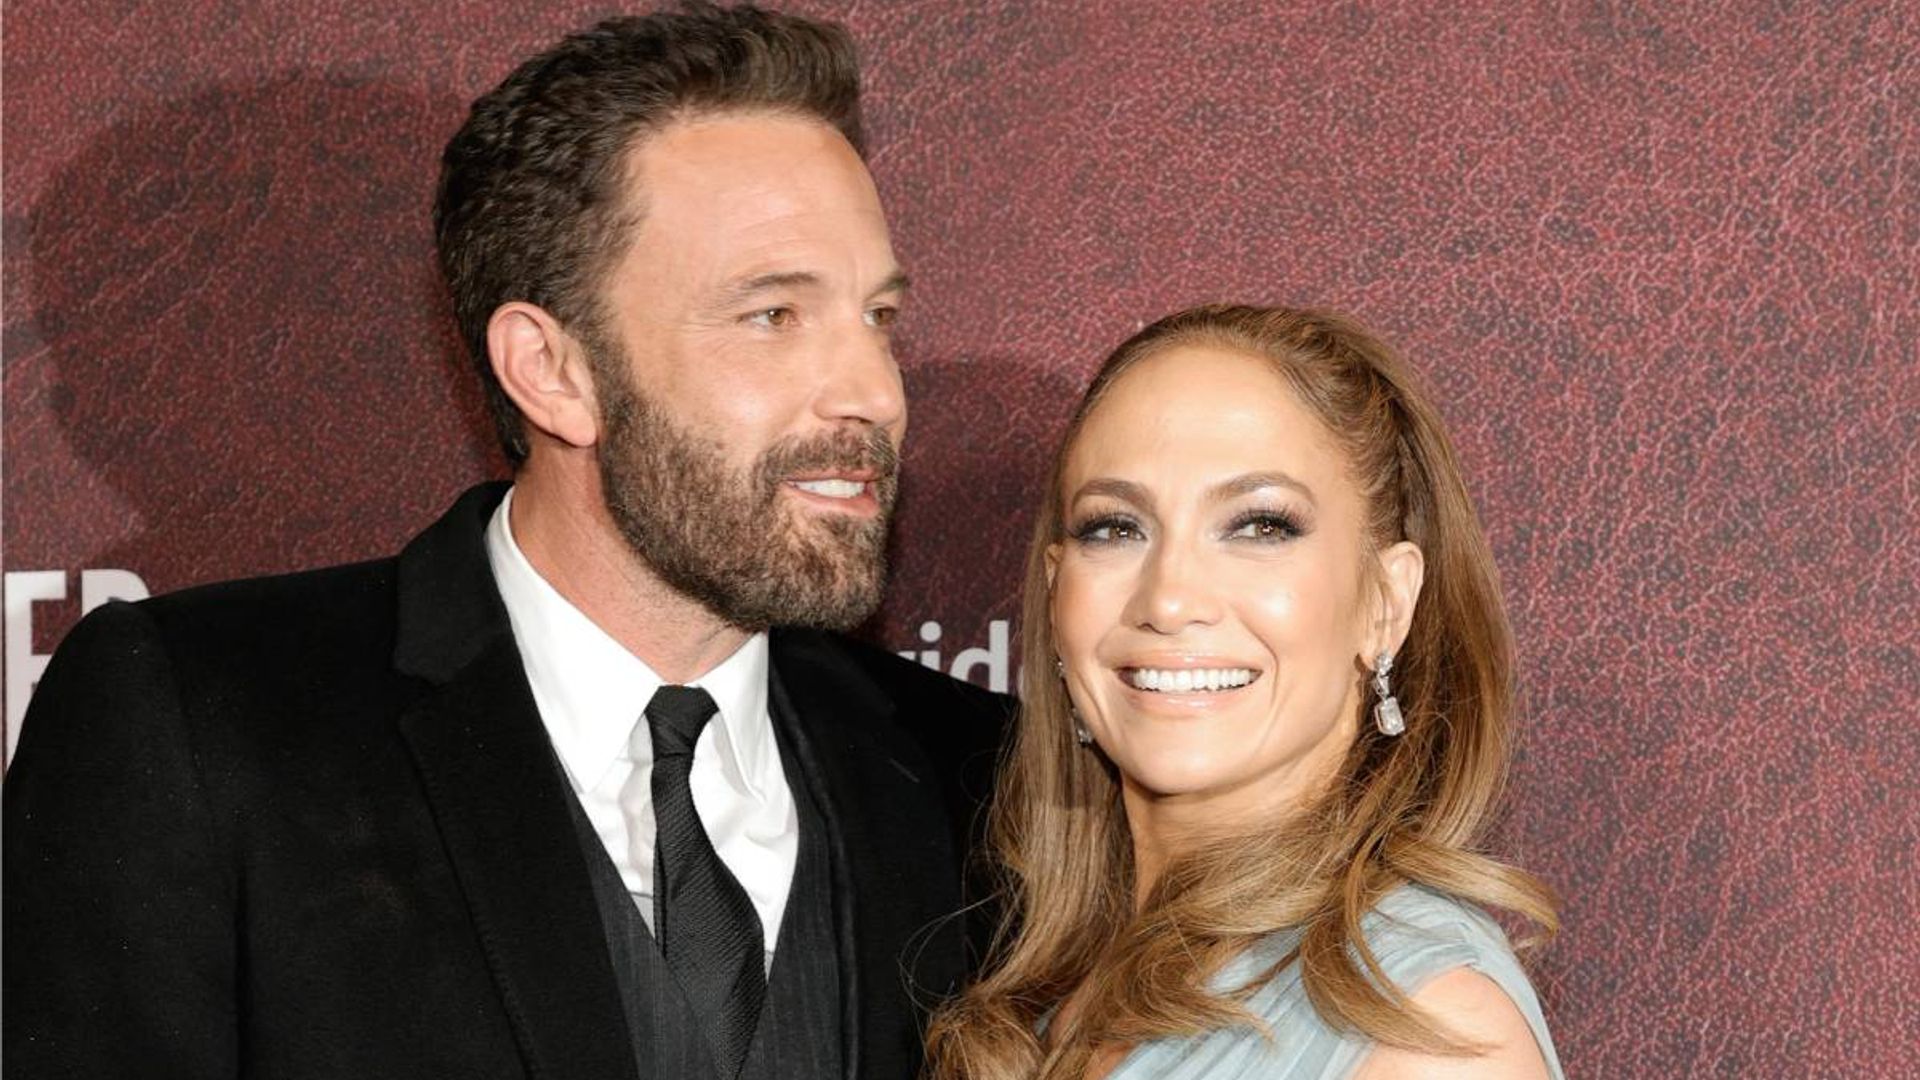 Ben Affleck announces exciting news involving Jennifer Lopez amid big change to family life